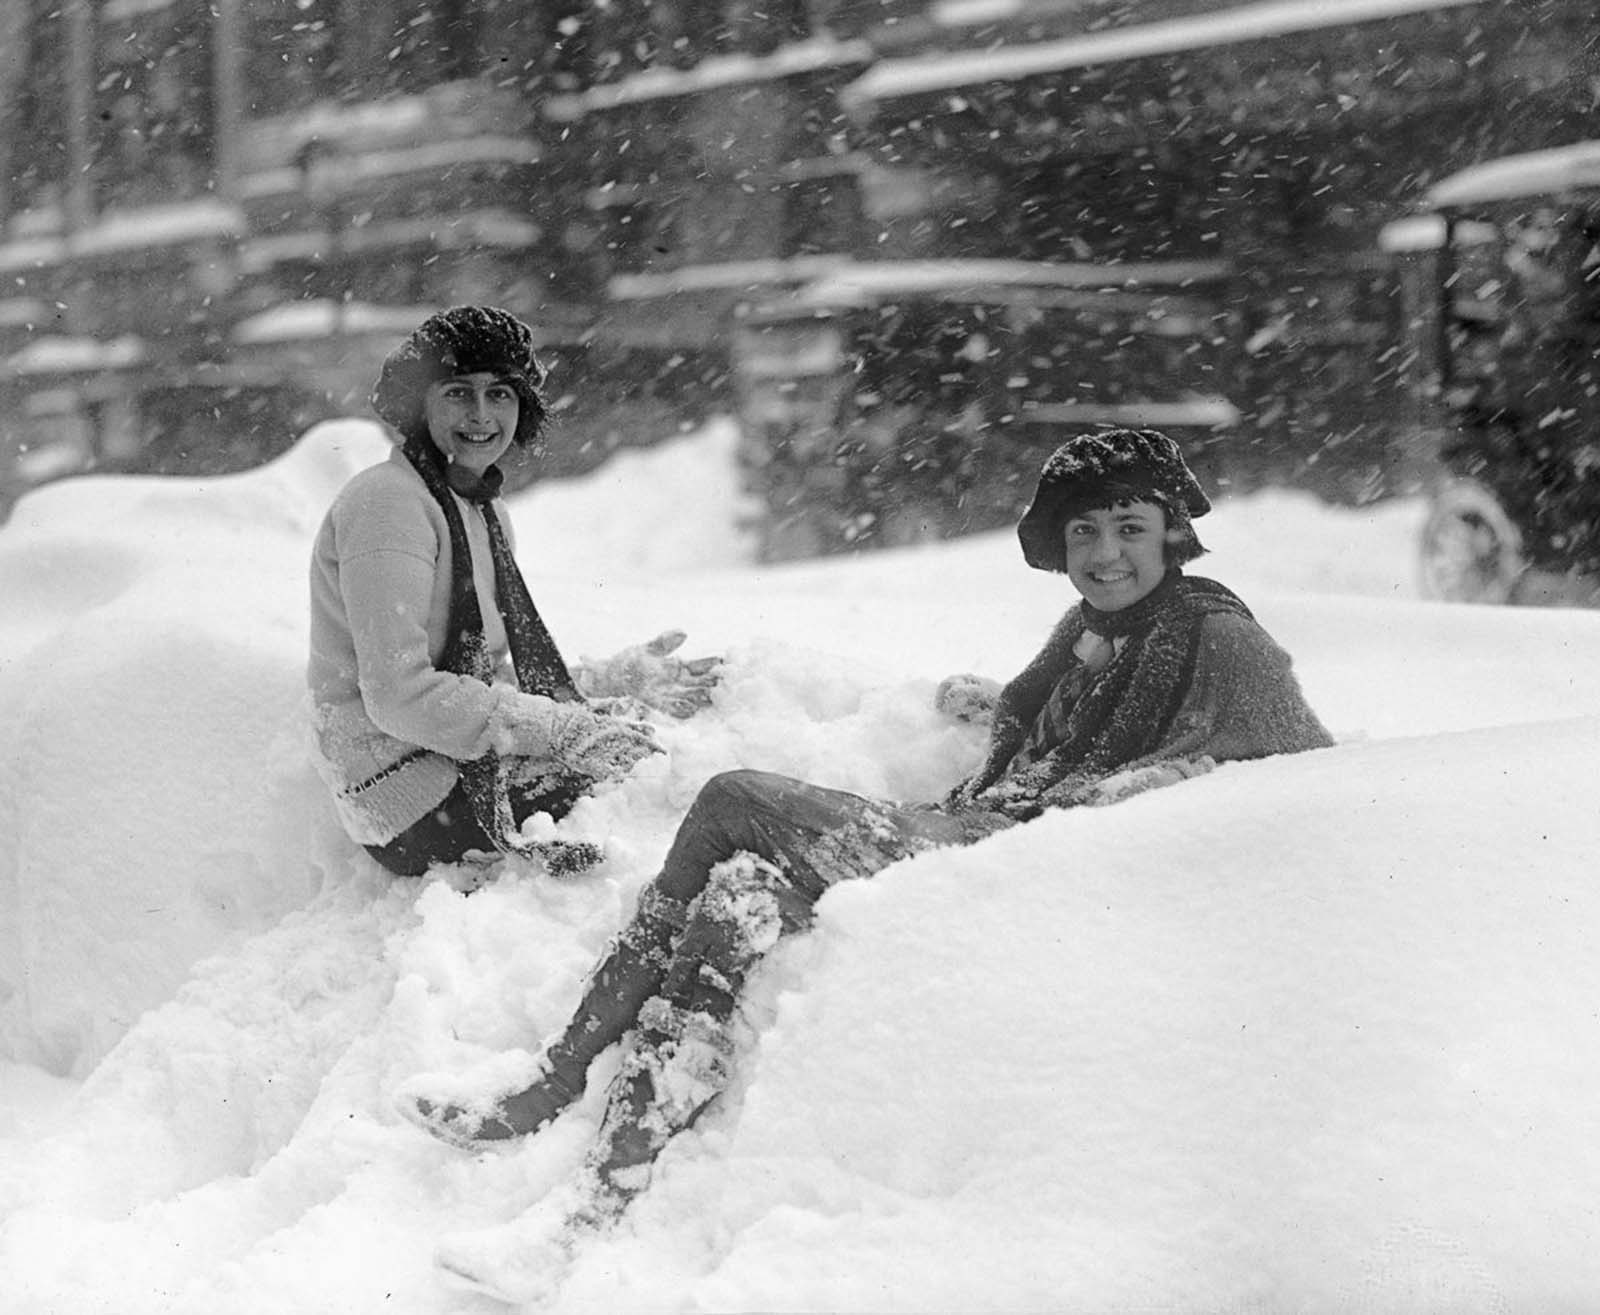 The Knickerbocker Storm: Historical Photos of the deadliest Blizzard in the Washington D.C. History